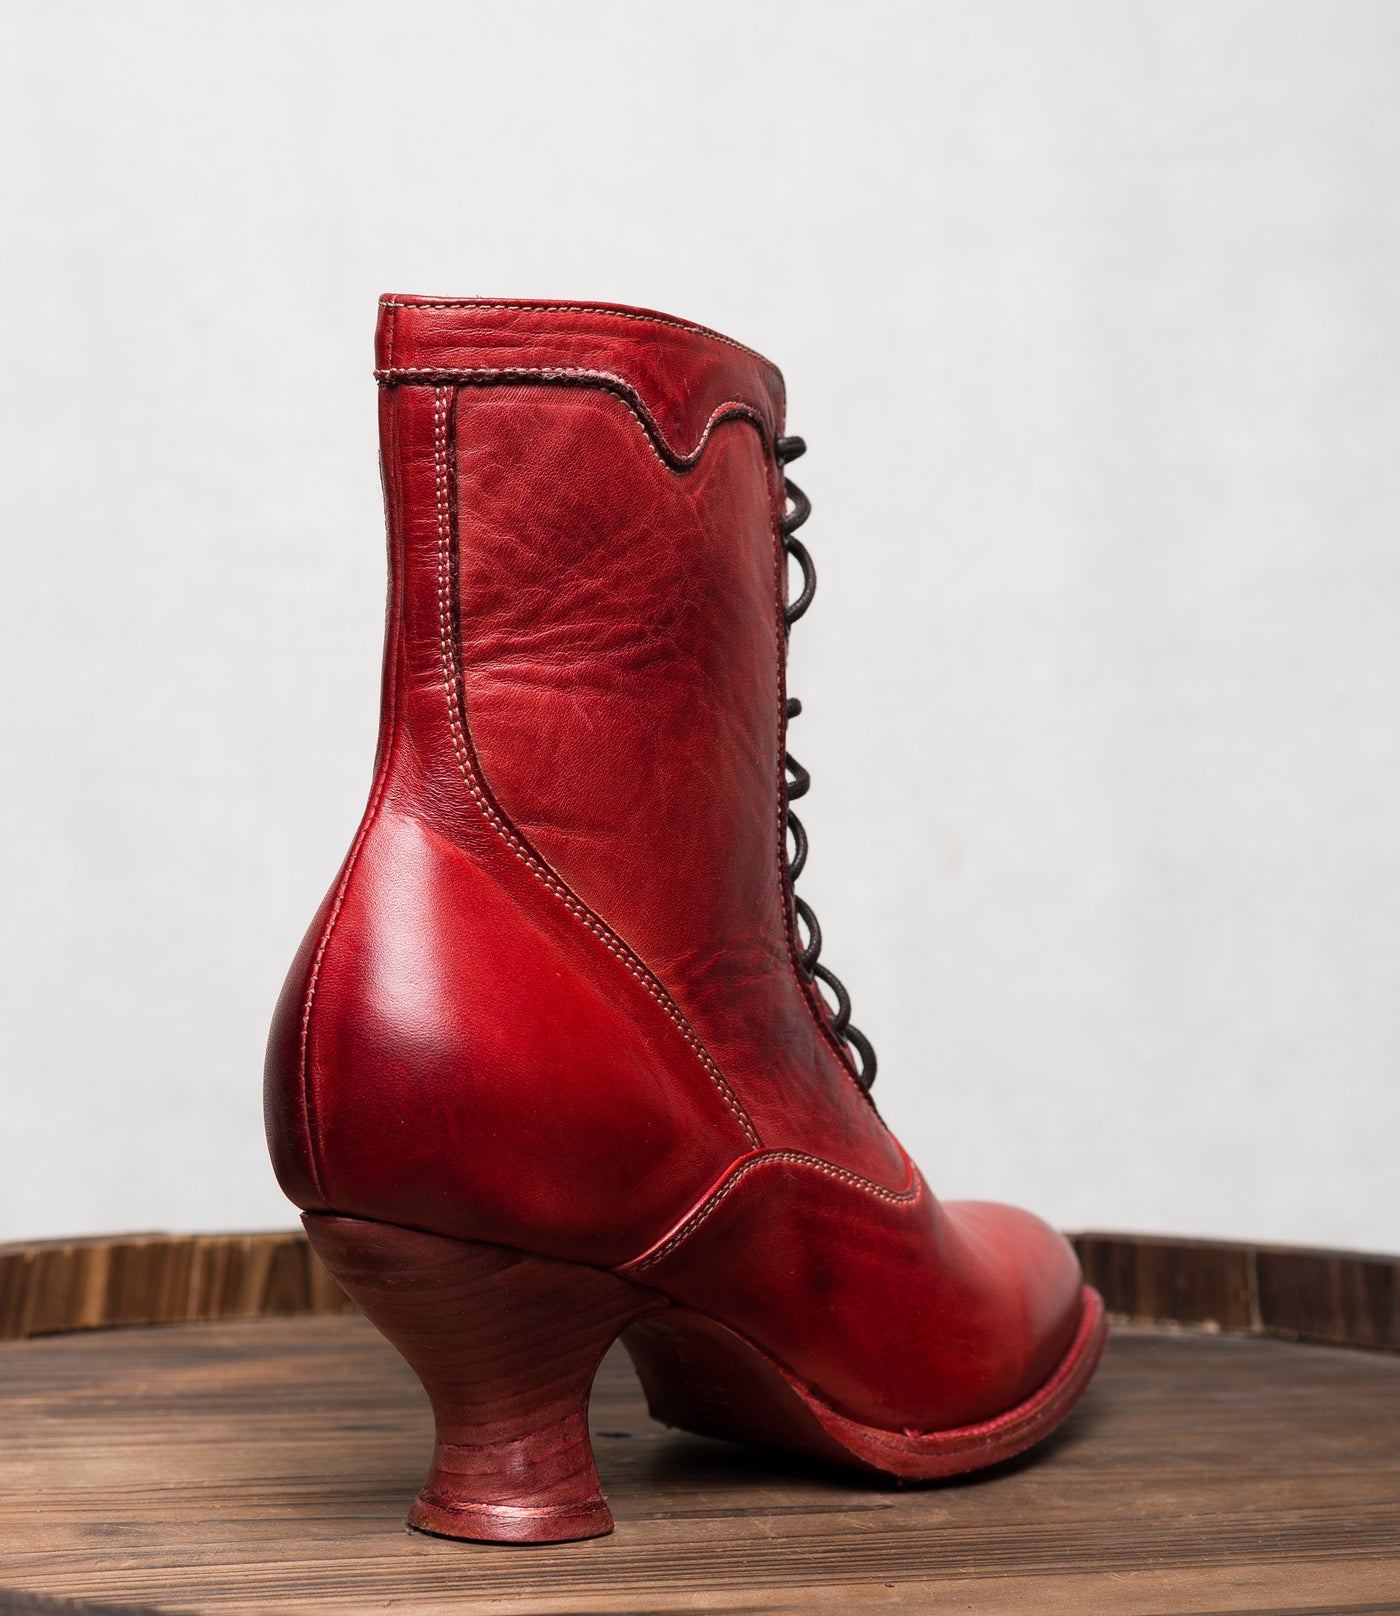 Victorian Style Leather Ankle Boots in Red Rustic